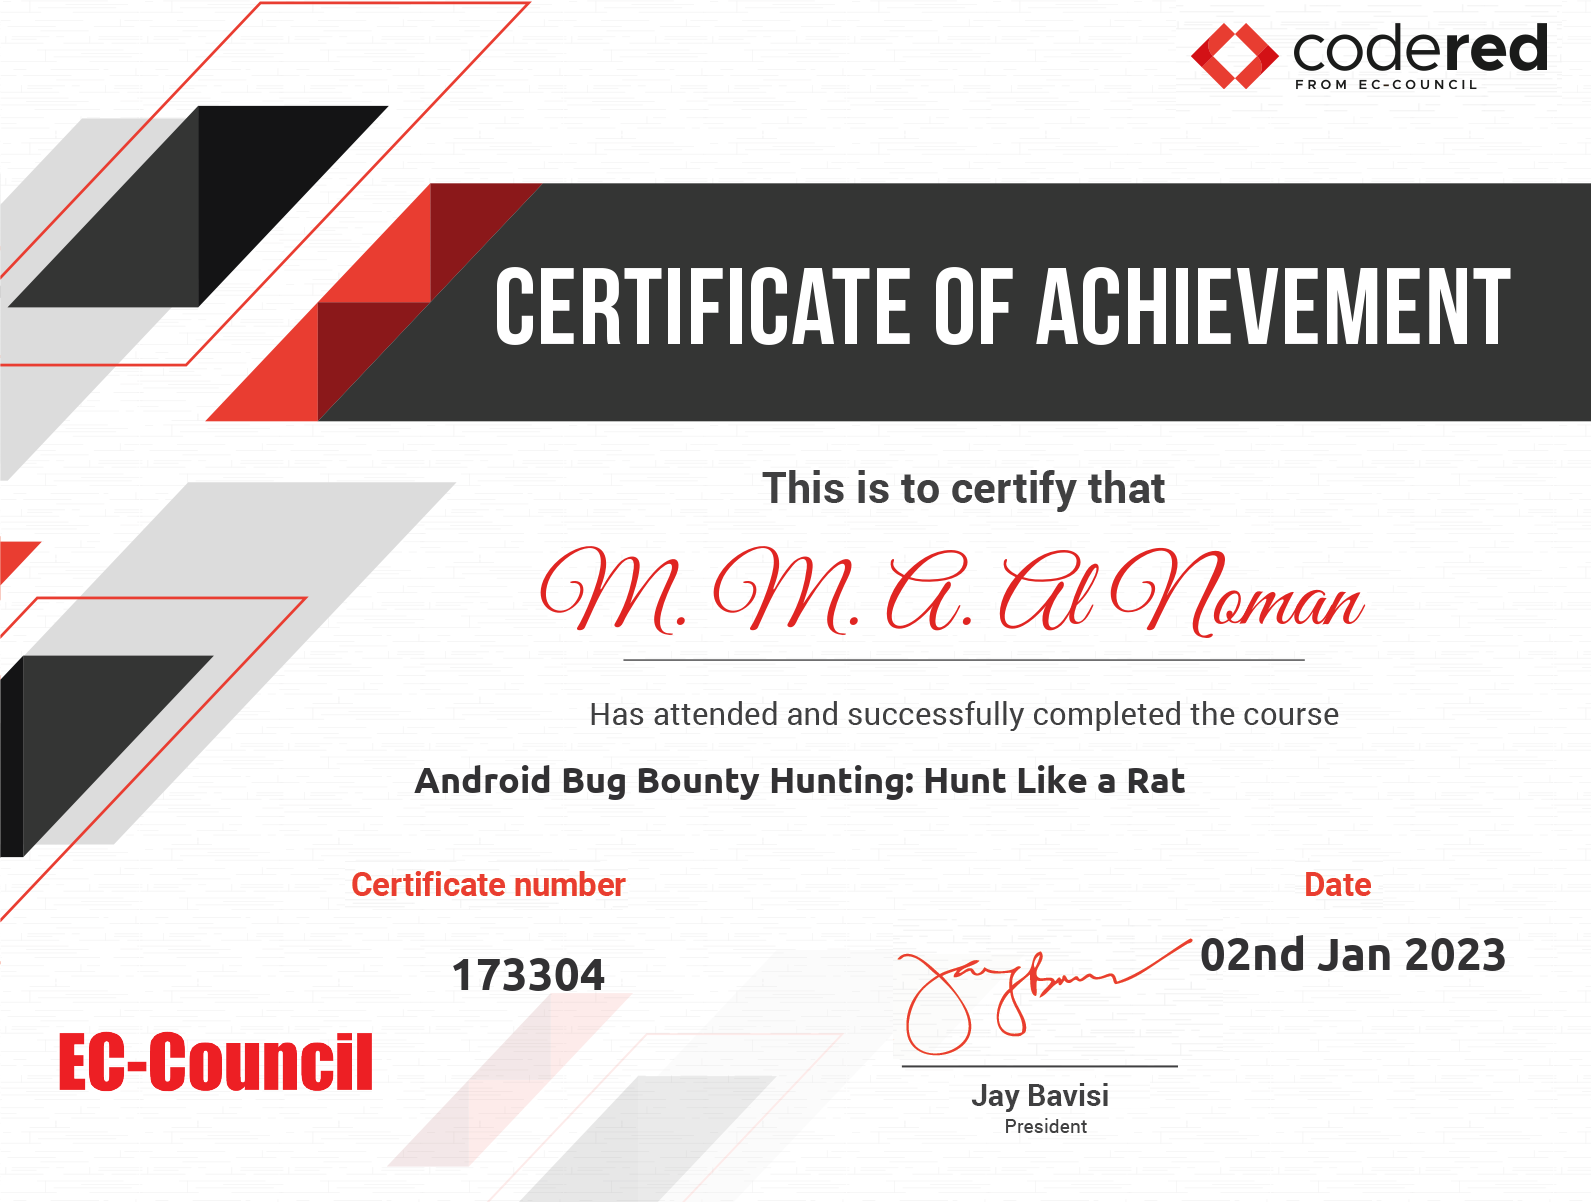 Android Bug Bounty Hunting: Hunt Like a Rat, Codered EC-Council, 2022